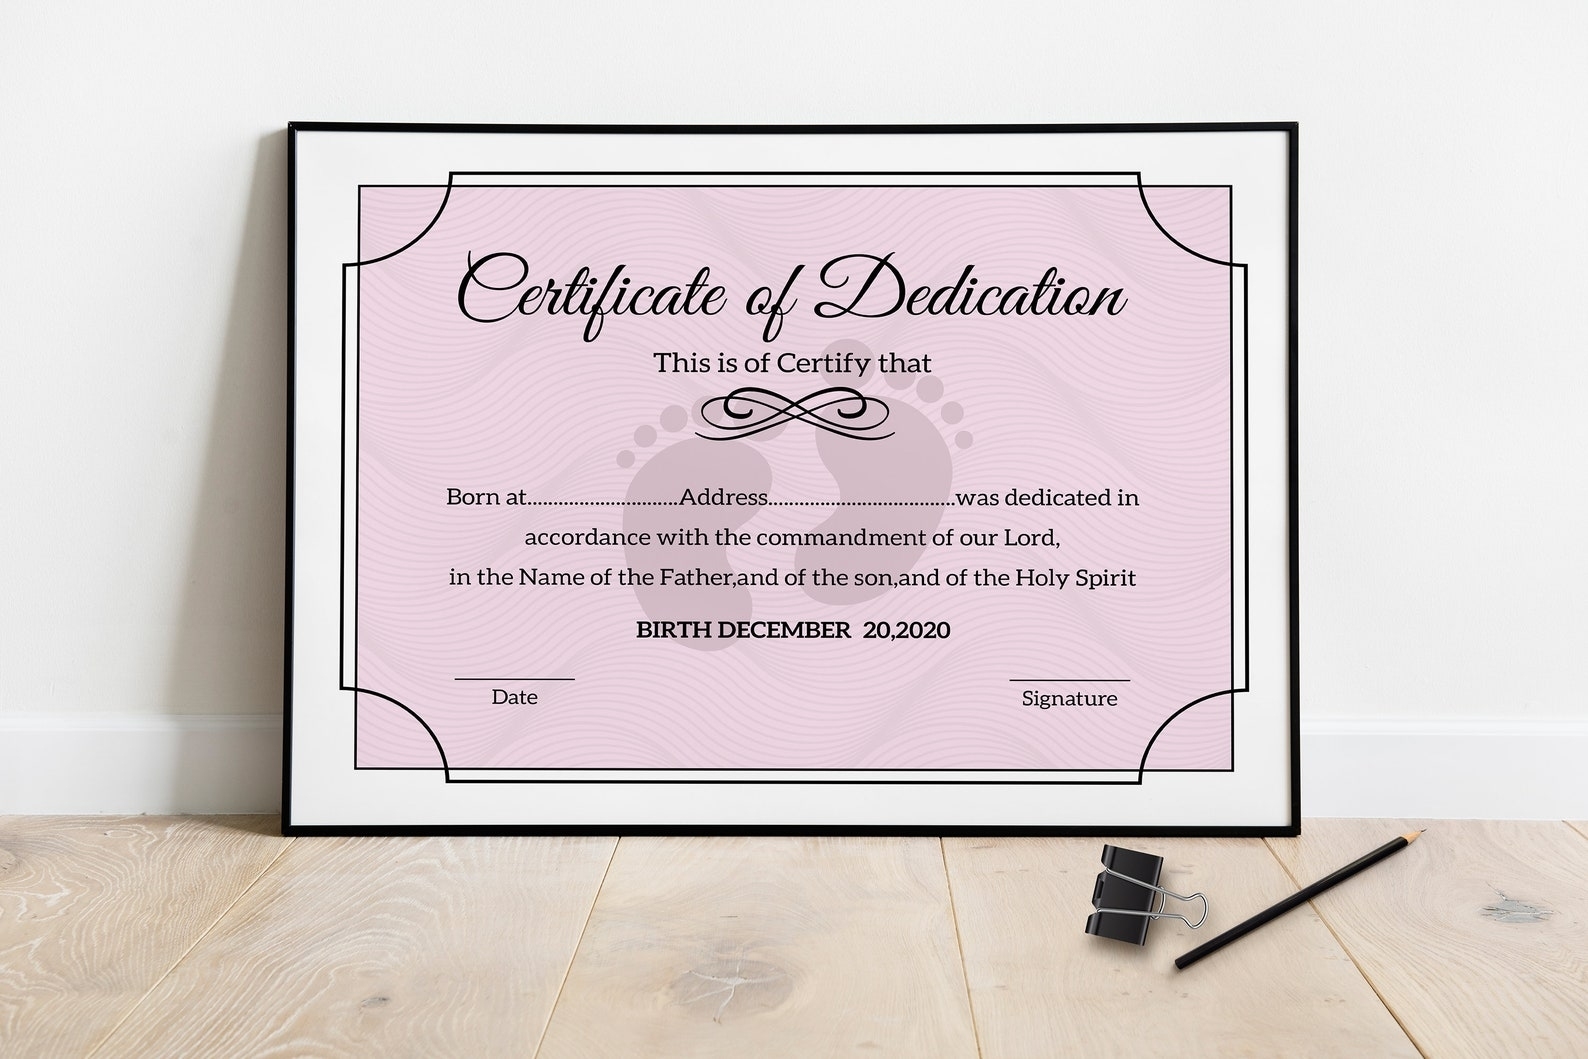 Baby Dedication Certificate Certificate Template Photoshop | Etsy Throughout Baby Dedication Certificate Template